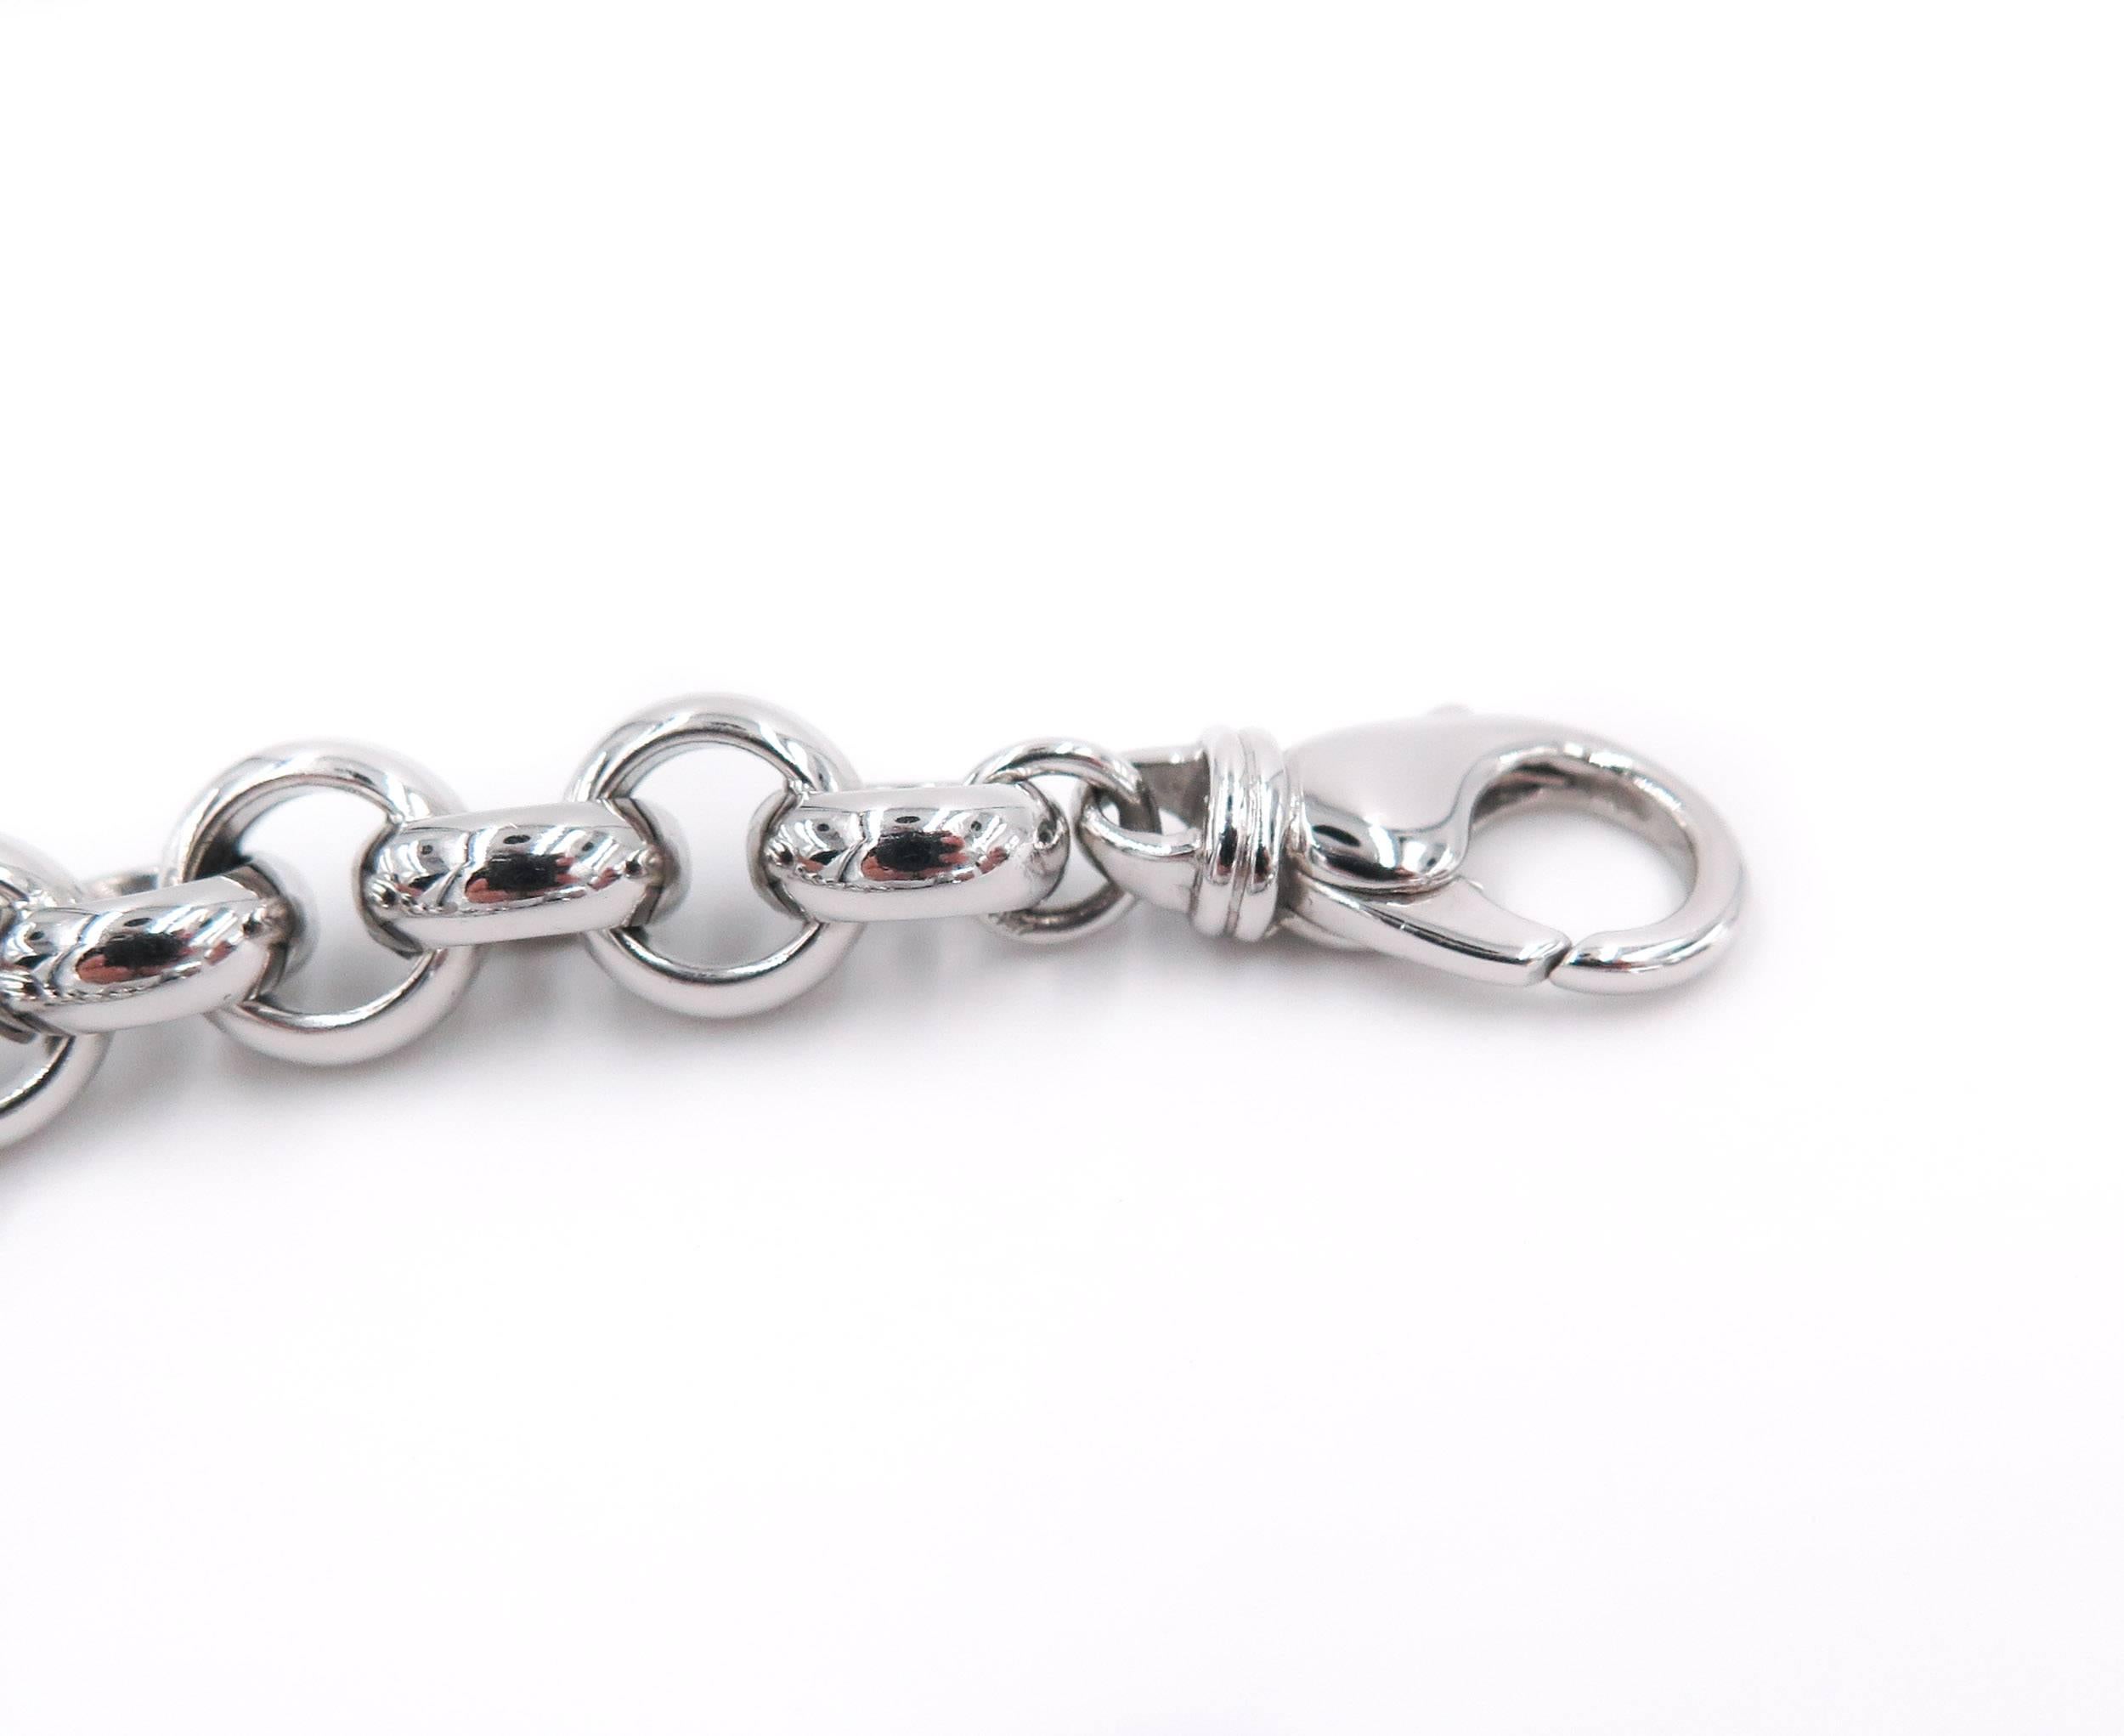 Very Chic! This solid 18K White Gold Link Bracelet is the perfect bracelet!  
Measures 7.25 inches in length with a large Lobster Claw clasp.
The finish is high polished, but the bracelet can also be made in a satin finish.
